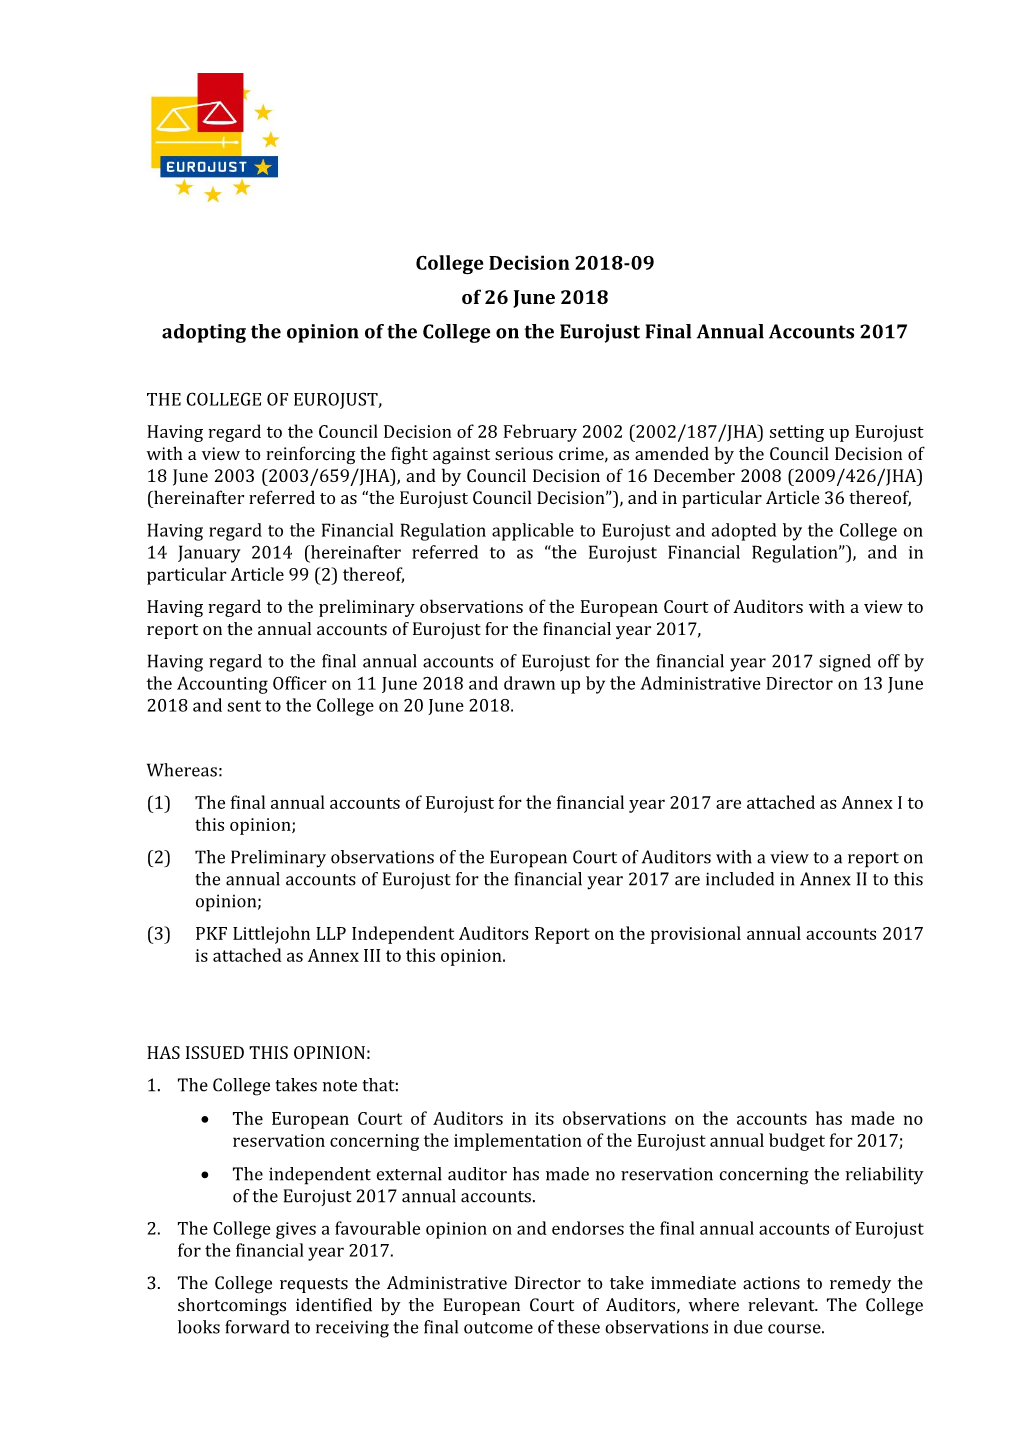 College Decision 2018-09 of 26 June 2018 Adopting the Opinion of the College on the Eurojust Final Annual Accounts 2017